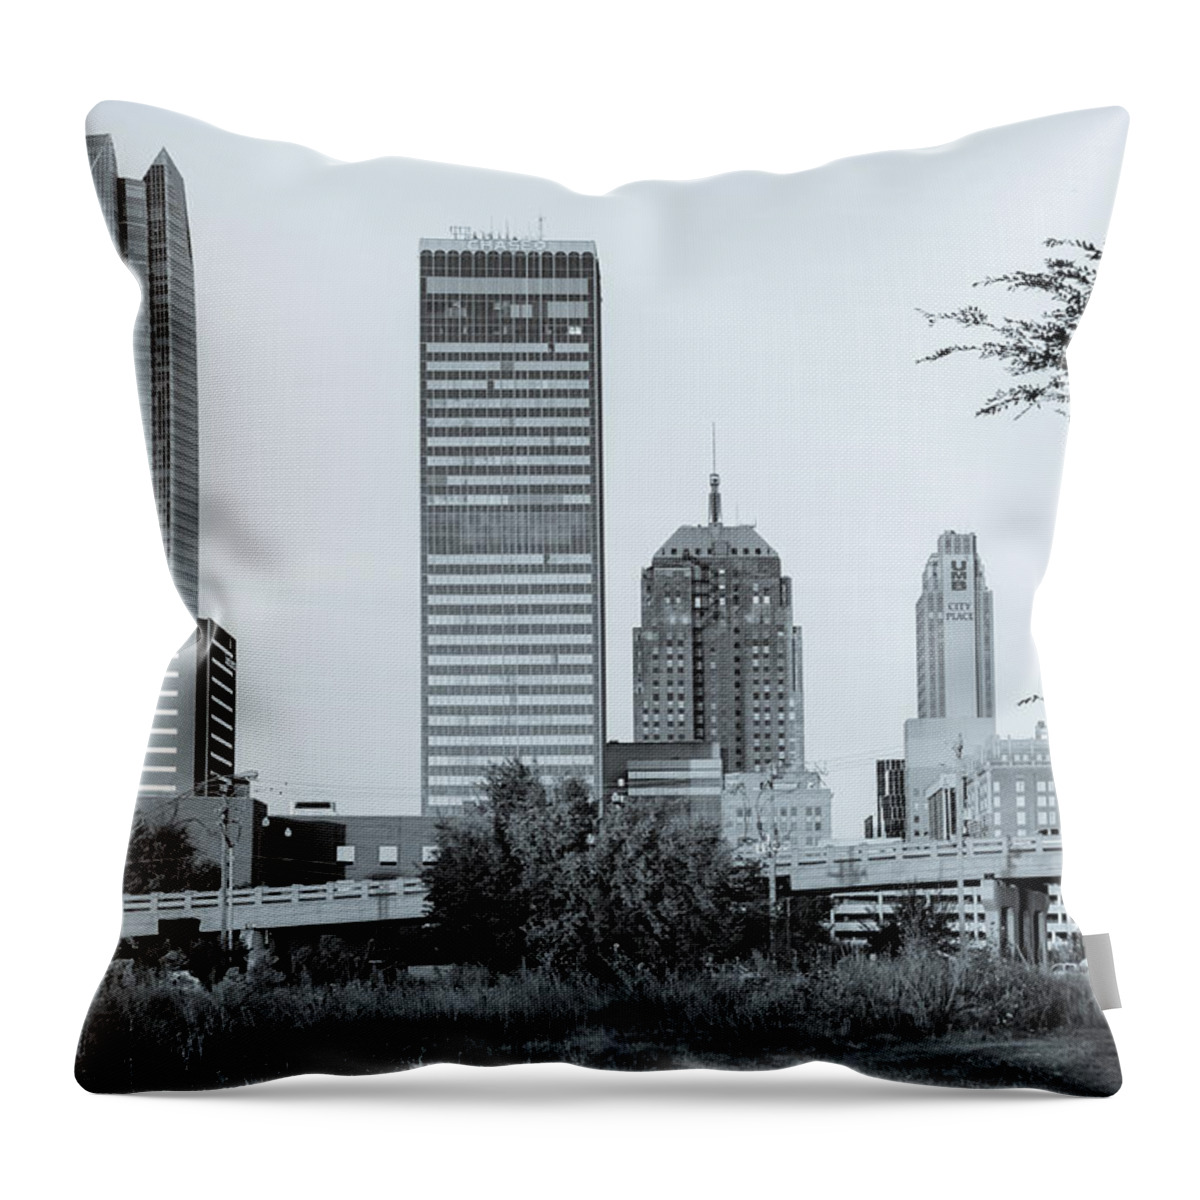 Oklahoma City Skyline Throw Pillow featuring the photograph Oklahoma City Skyline Morning - Black and White by Gregory Ballos